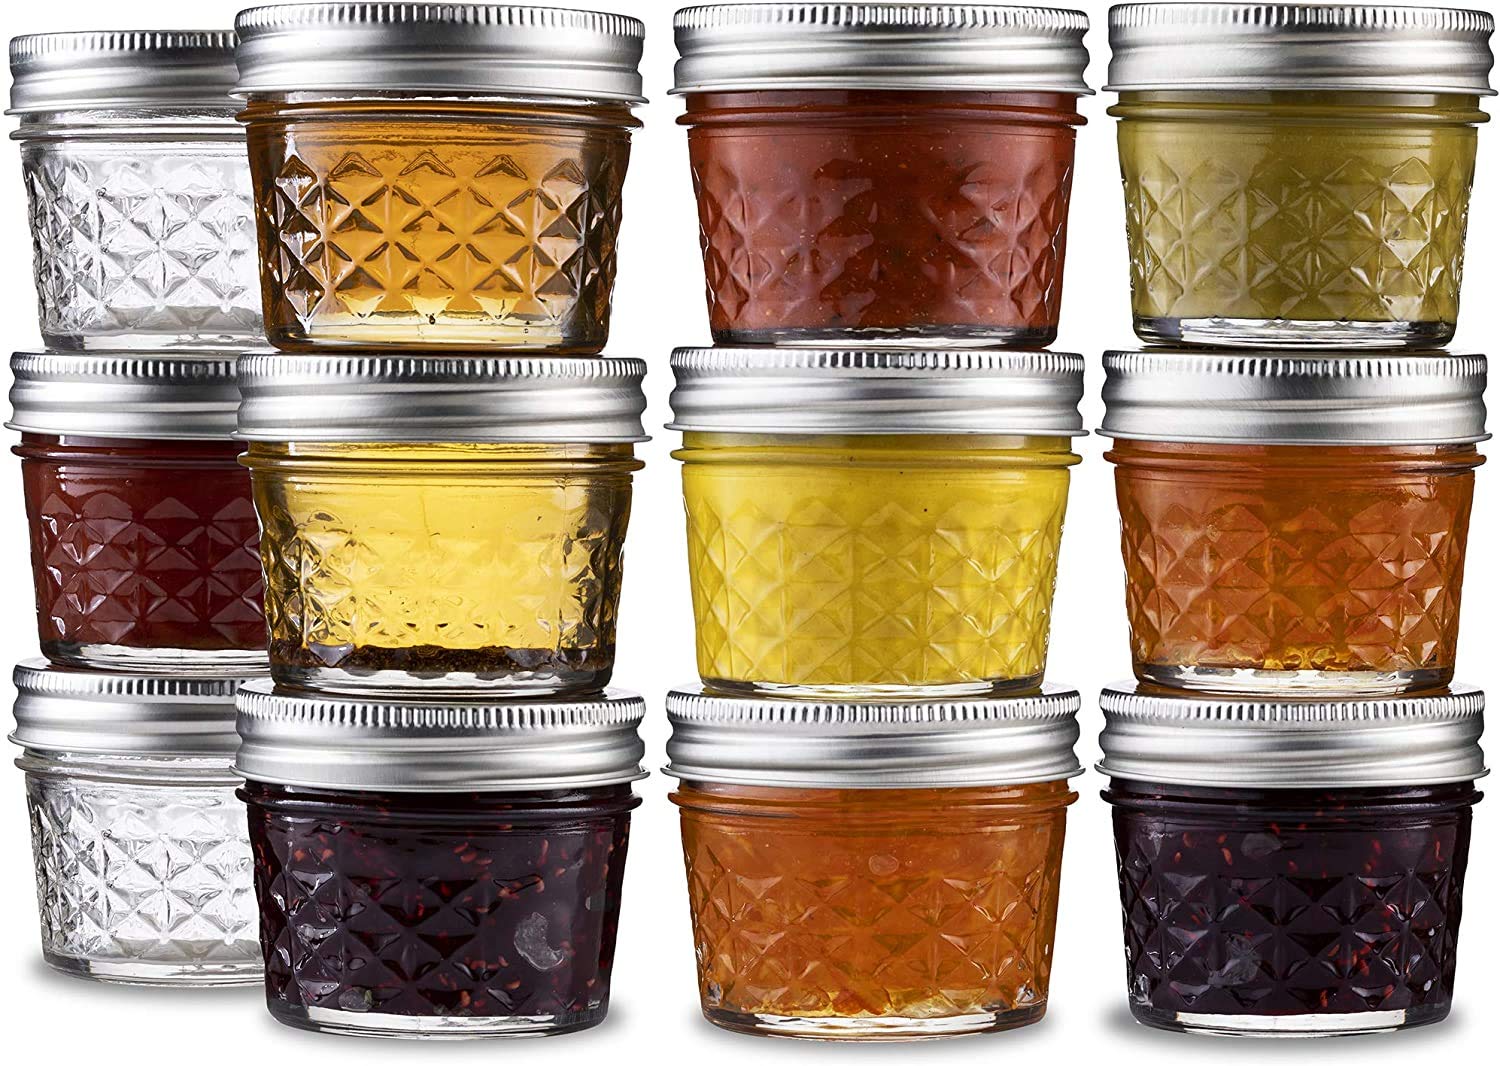 STAR WORK - Pineapple Shape Canning Jars with Lids, Glass Jars Cup for Jam, Honey, Jelly